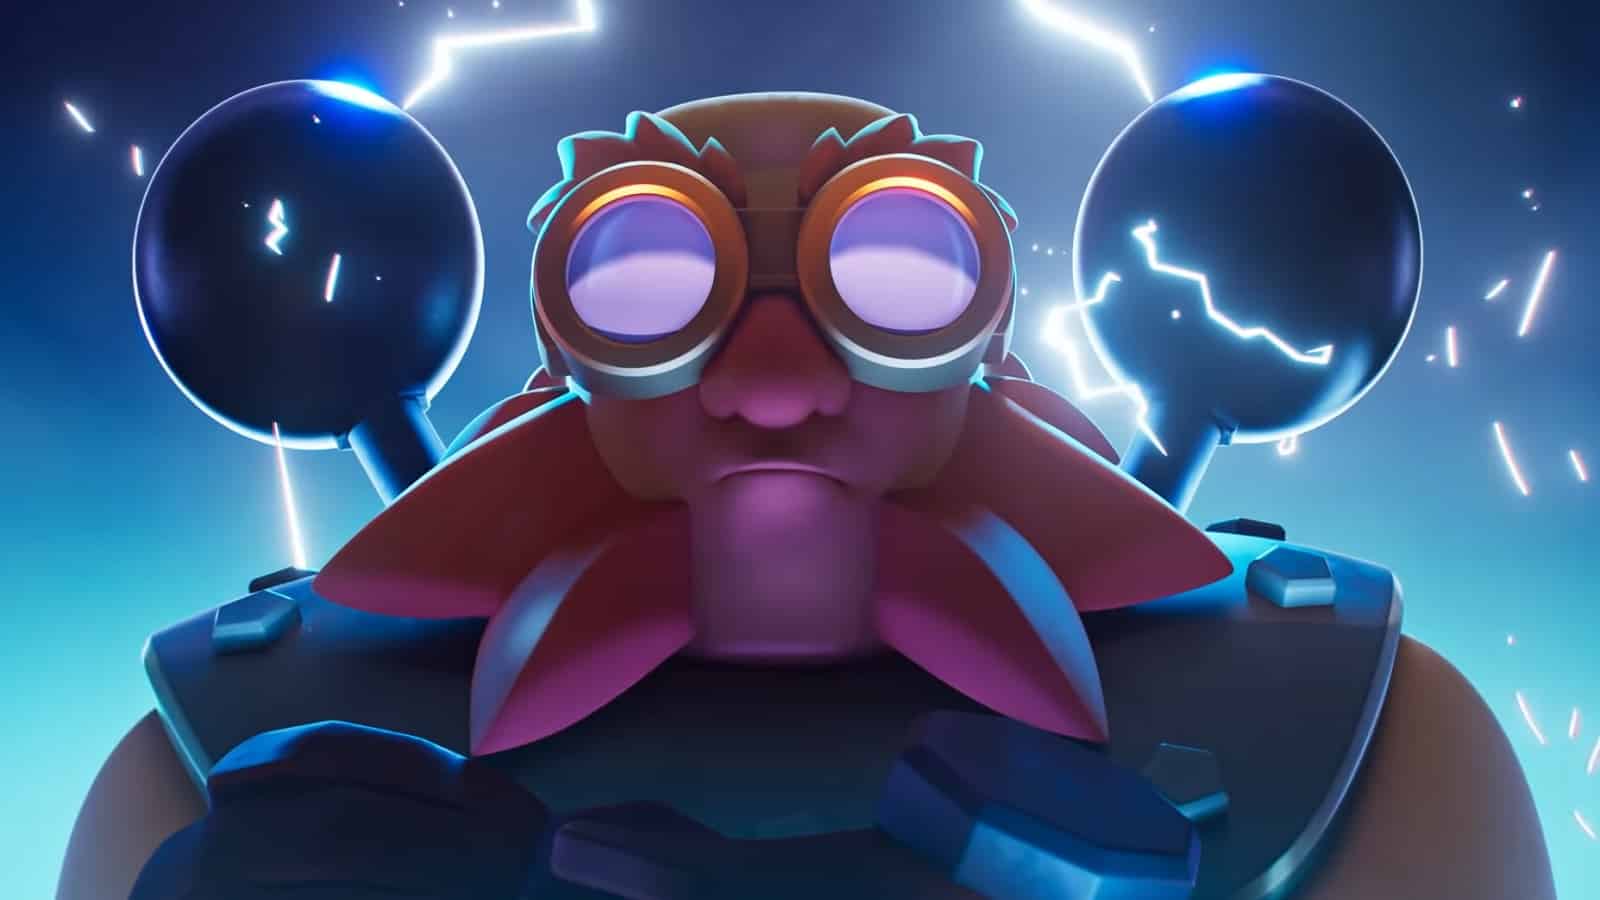 screenshot of the electro giant from the official clash royale introduction video